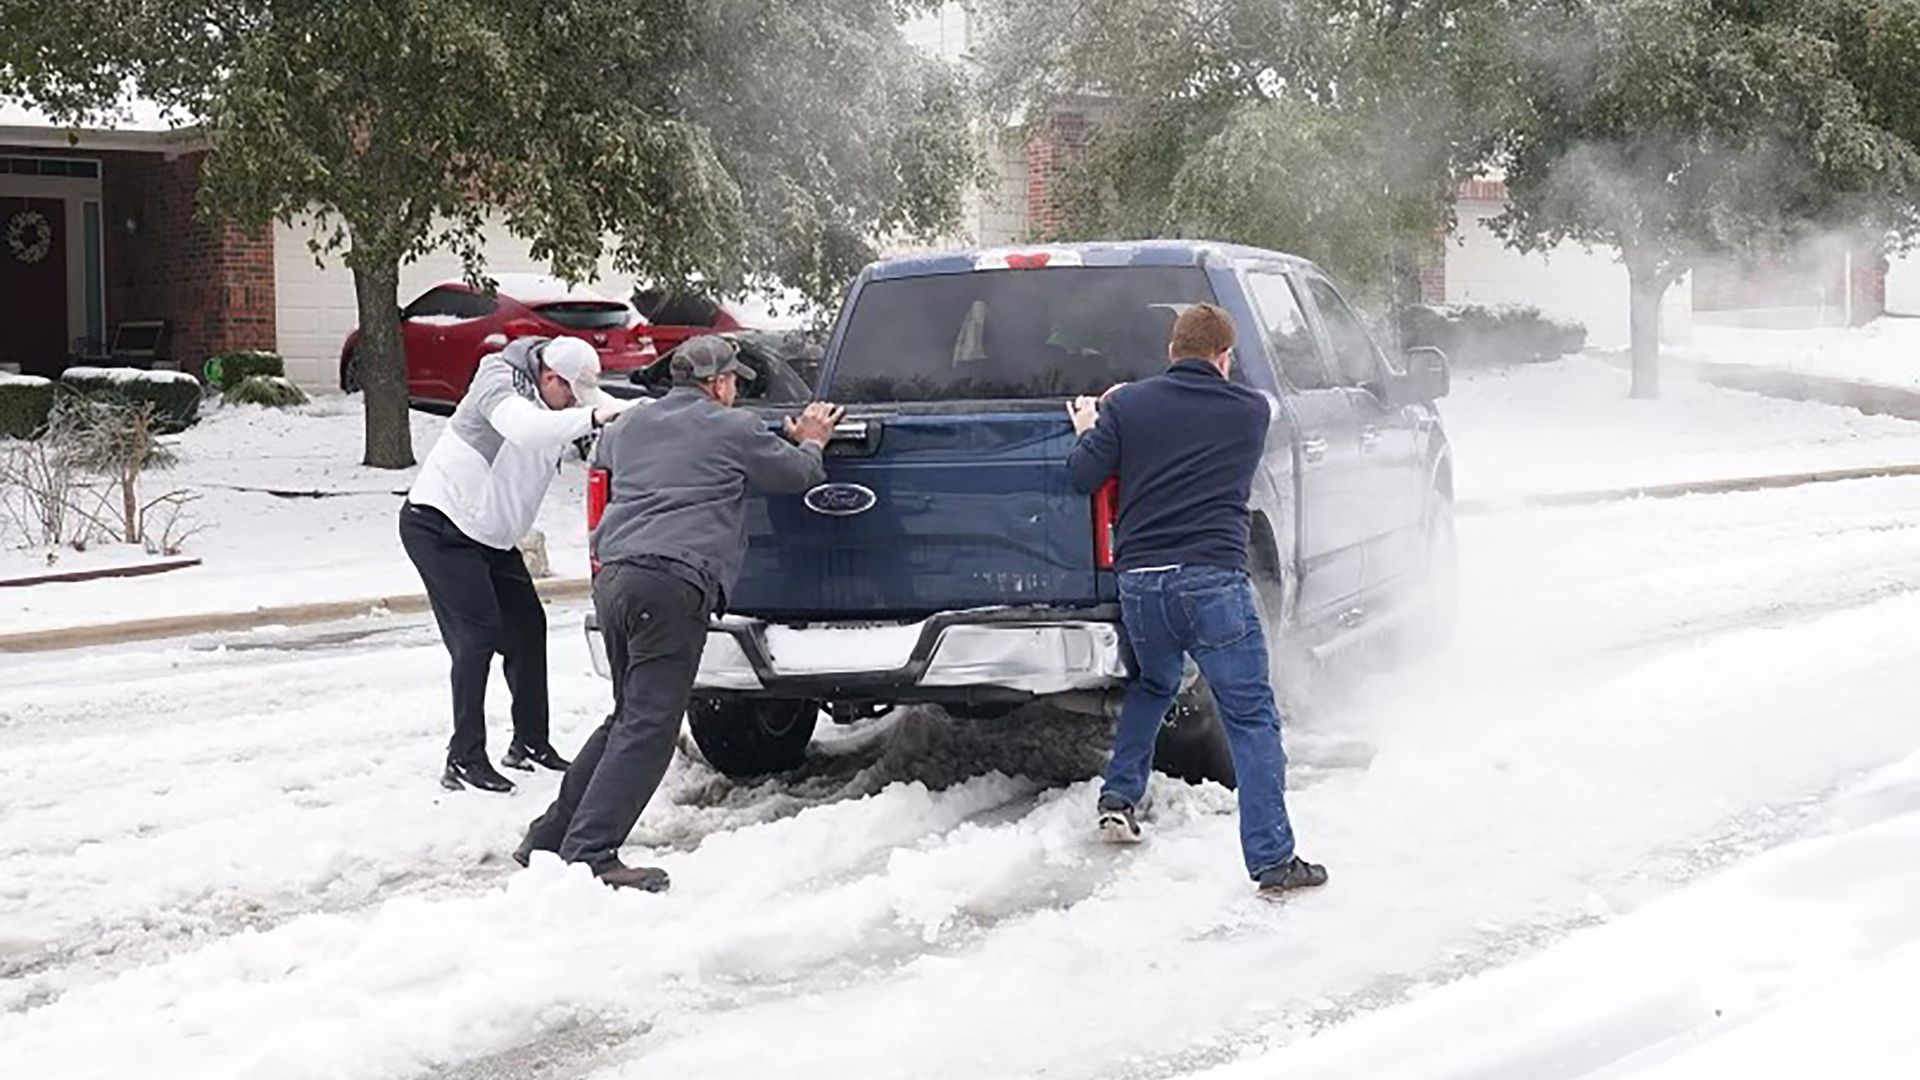 Residents help a pickup driver get out of ice on the road in Round Rock, Texas, on February 17, 2021, after a winter storm